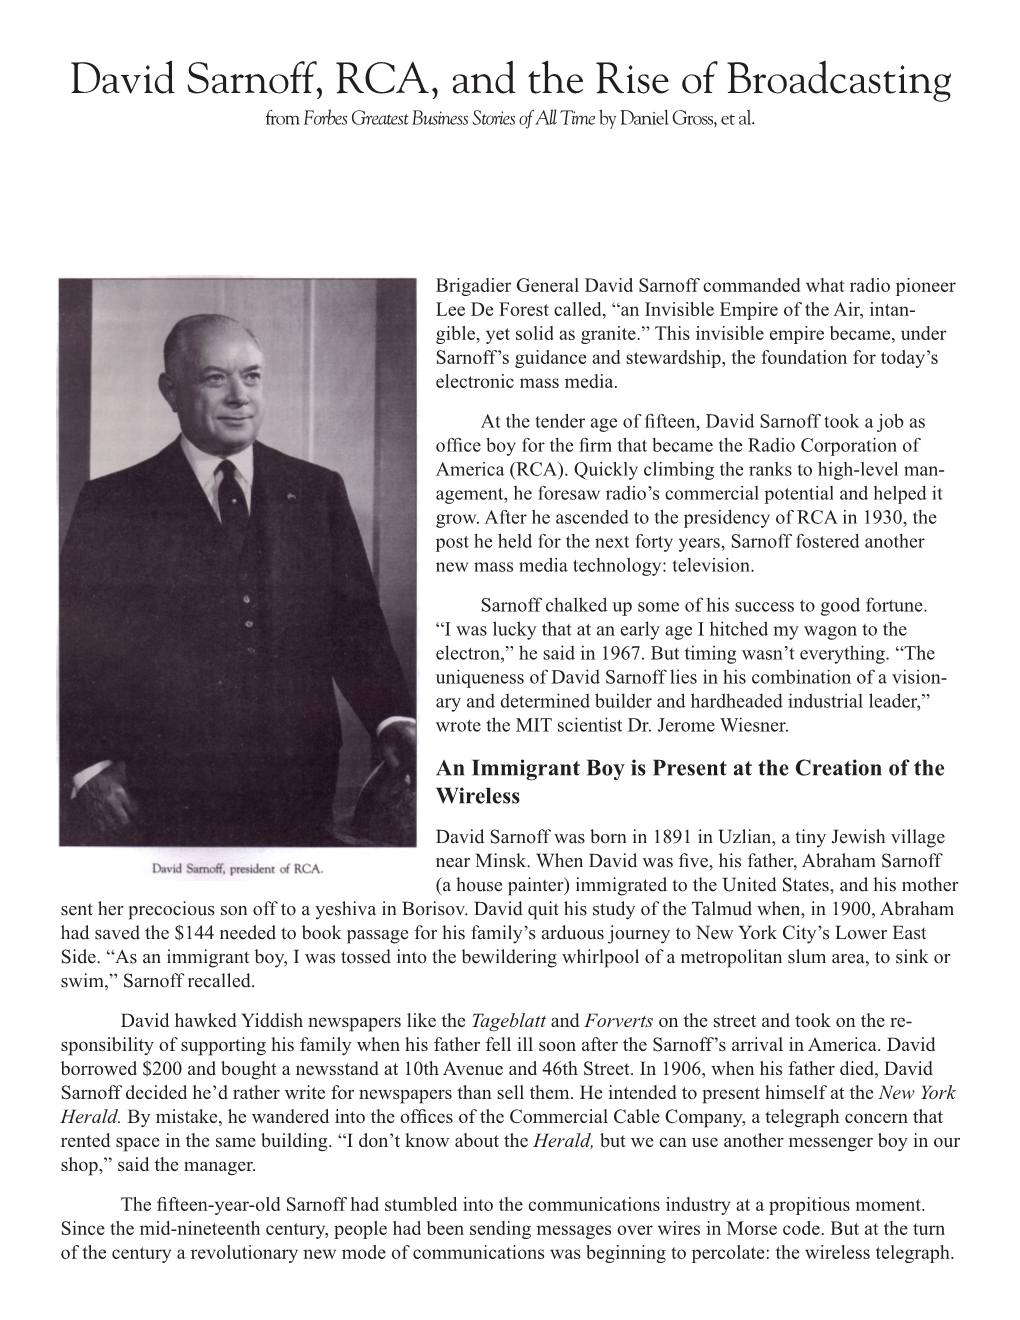 David Sarnoff, RCA, and the Rise of Broadcasting from Forbes Greatest Business Stories of All Time by Daniel Gross, Et Al